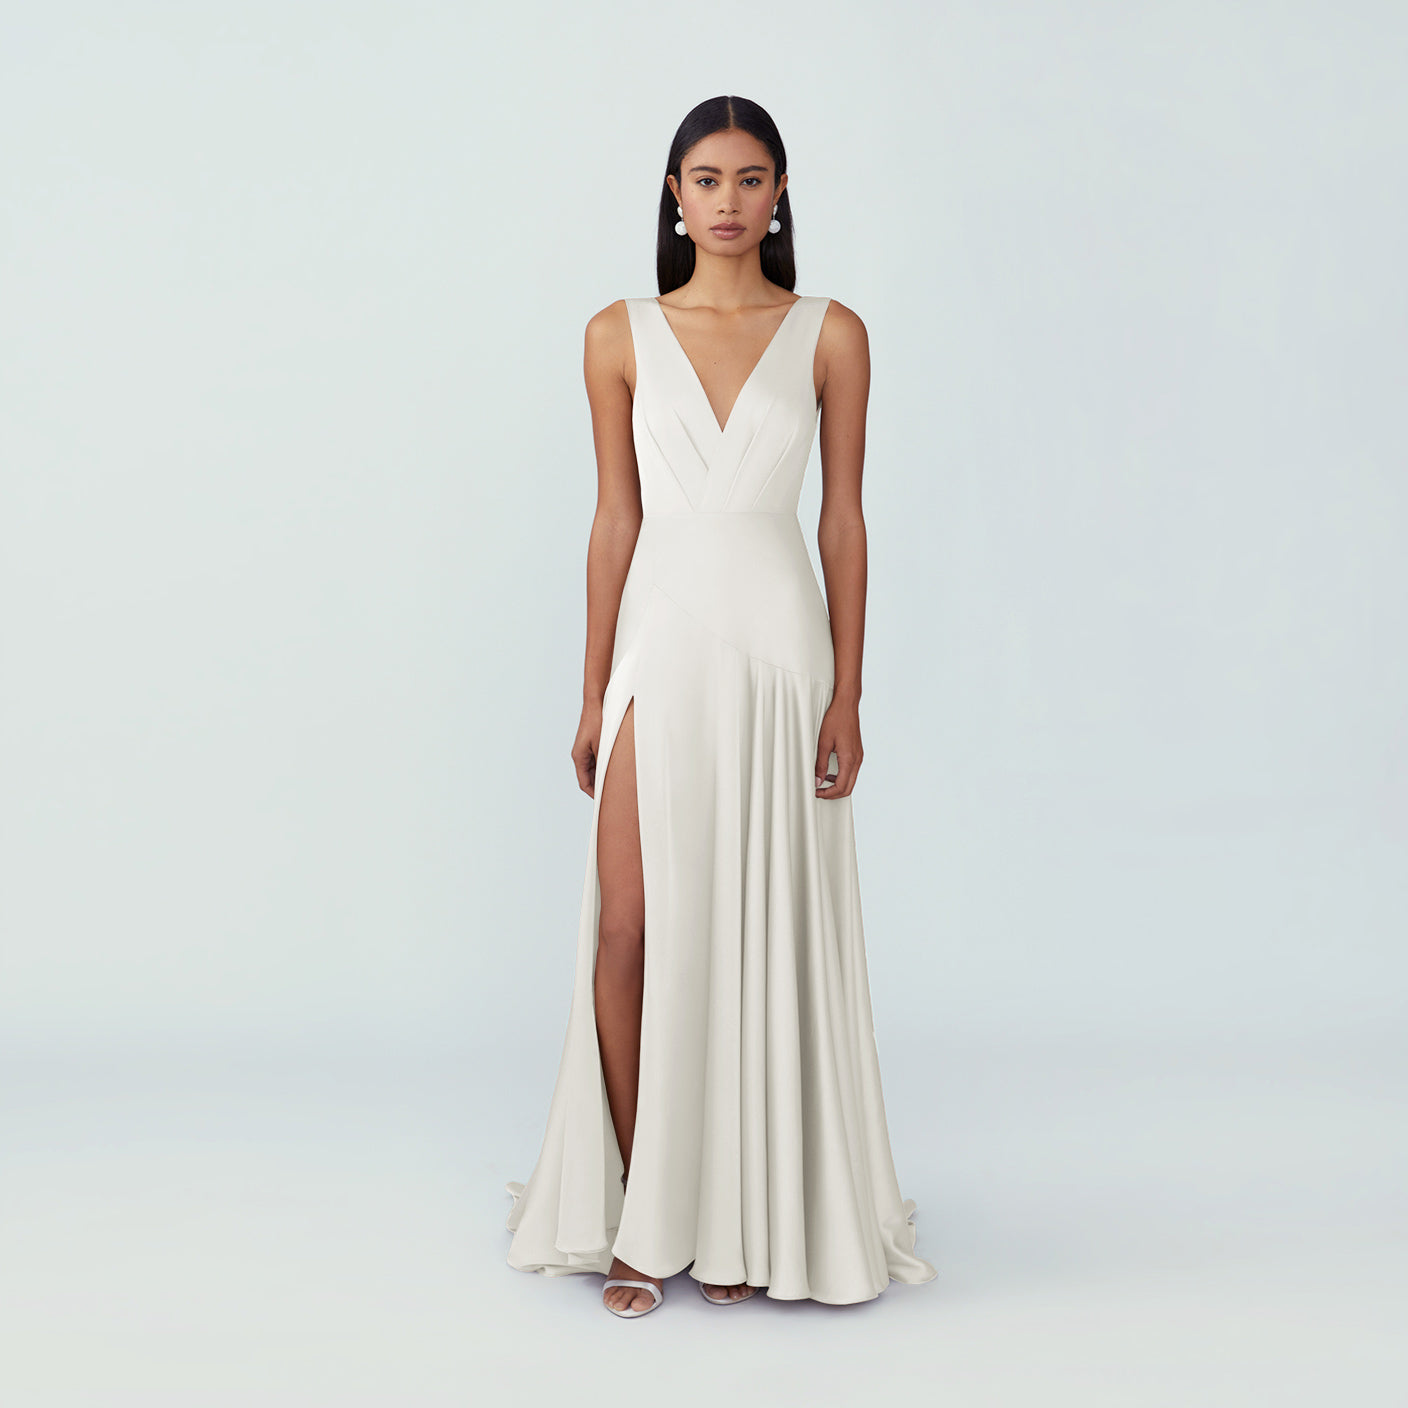 31 Wedding Dresses For Small Busts - Starting at $295 (2023